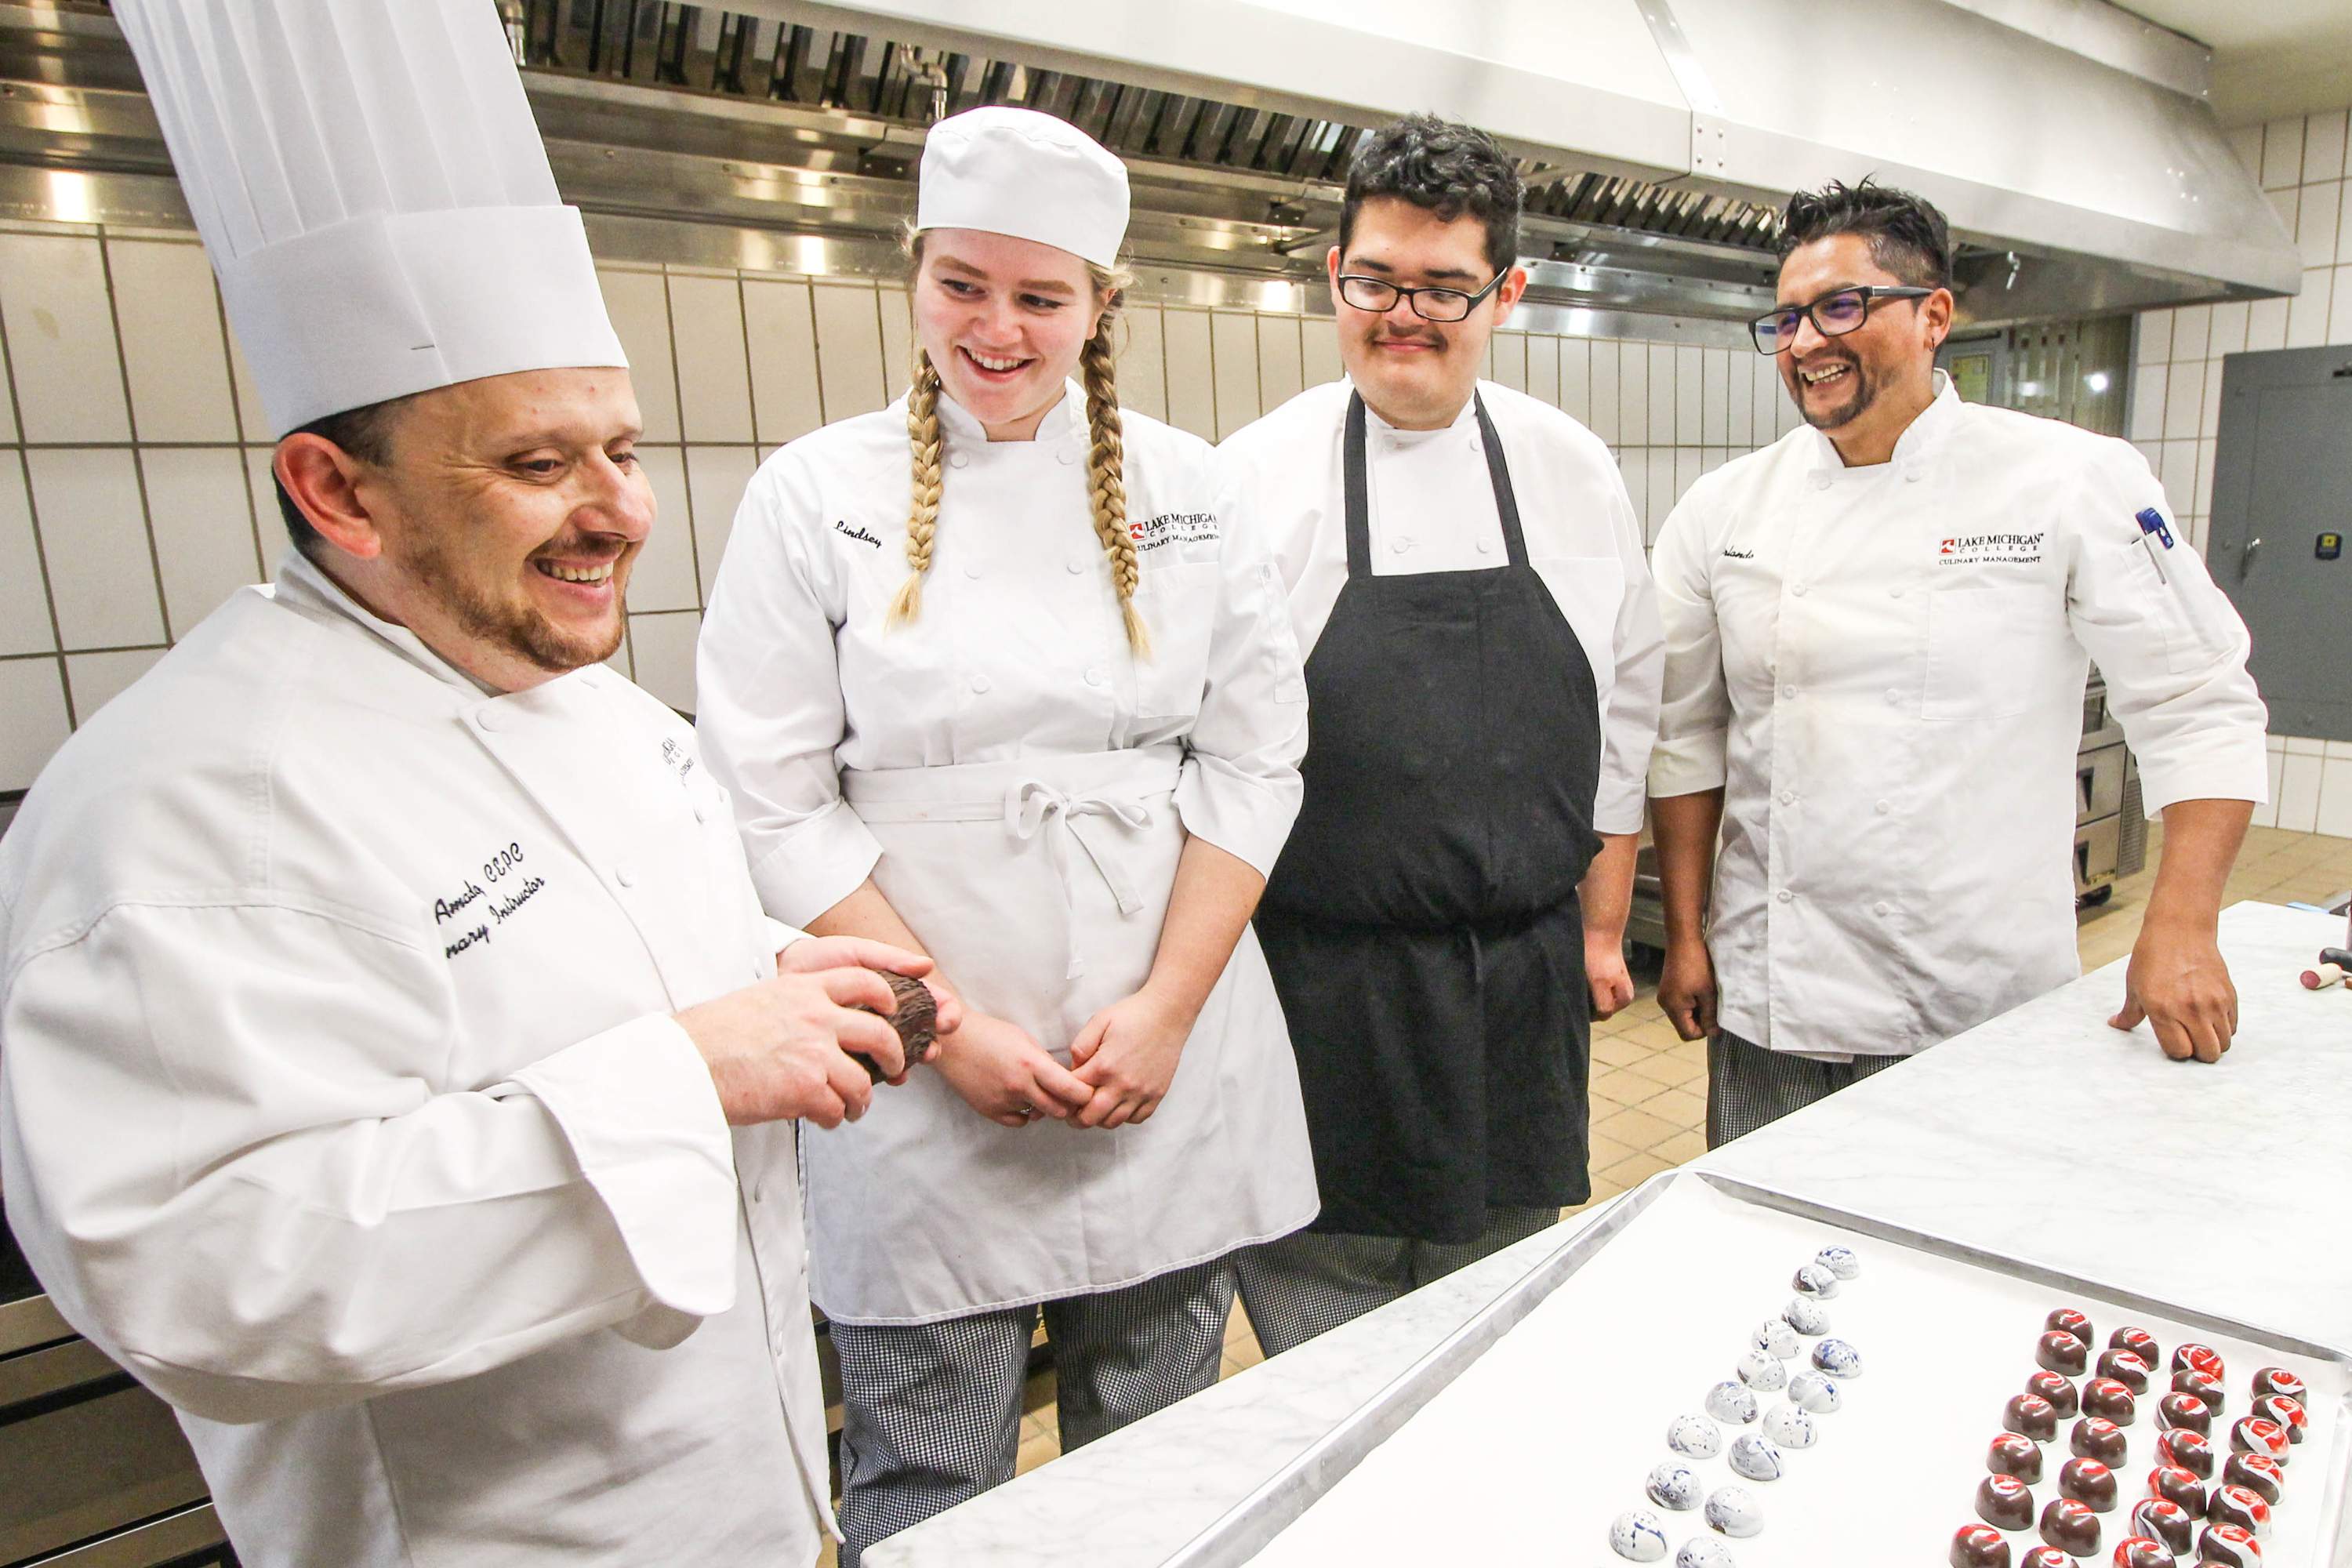 LMC chef with students